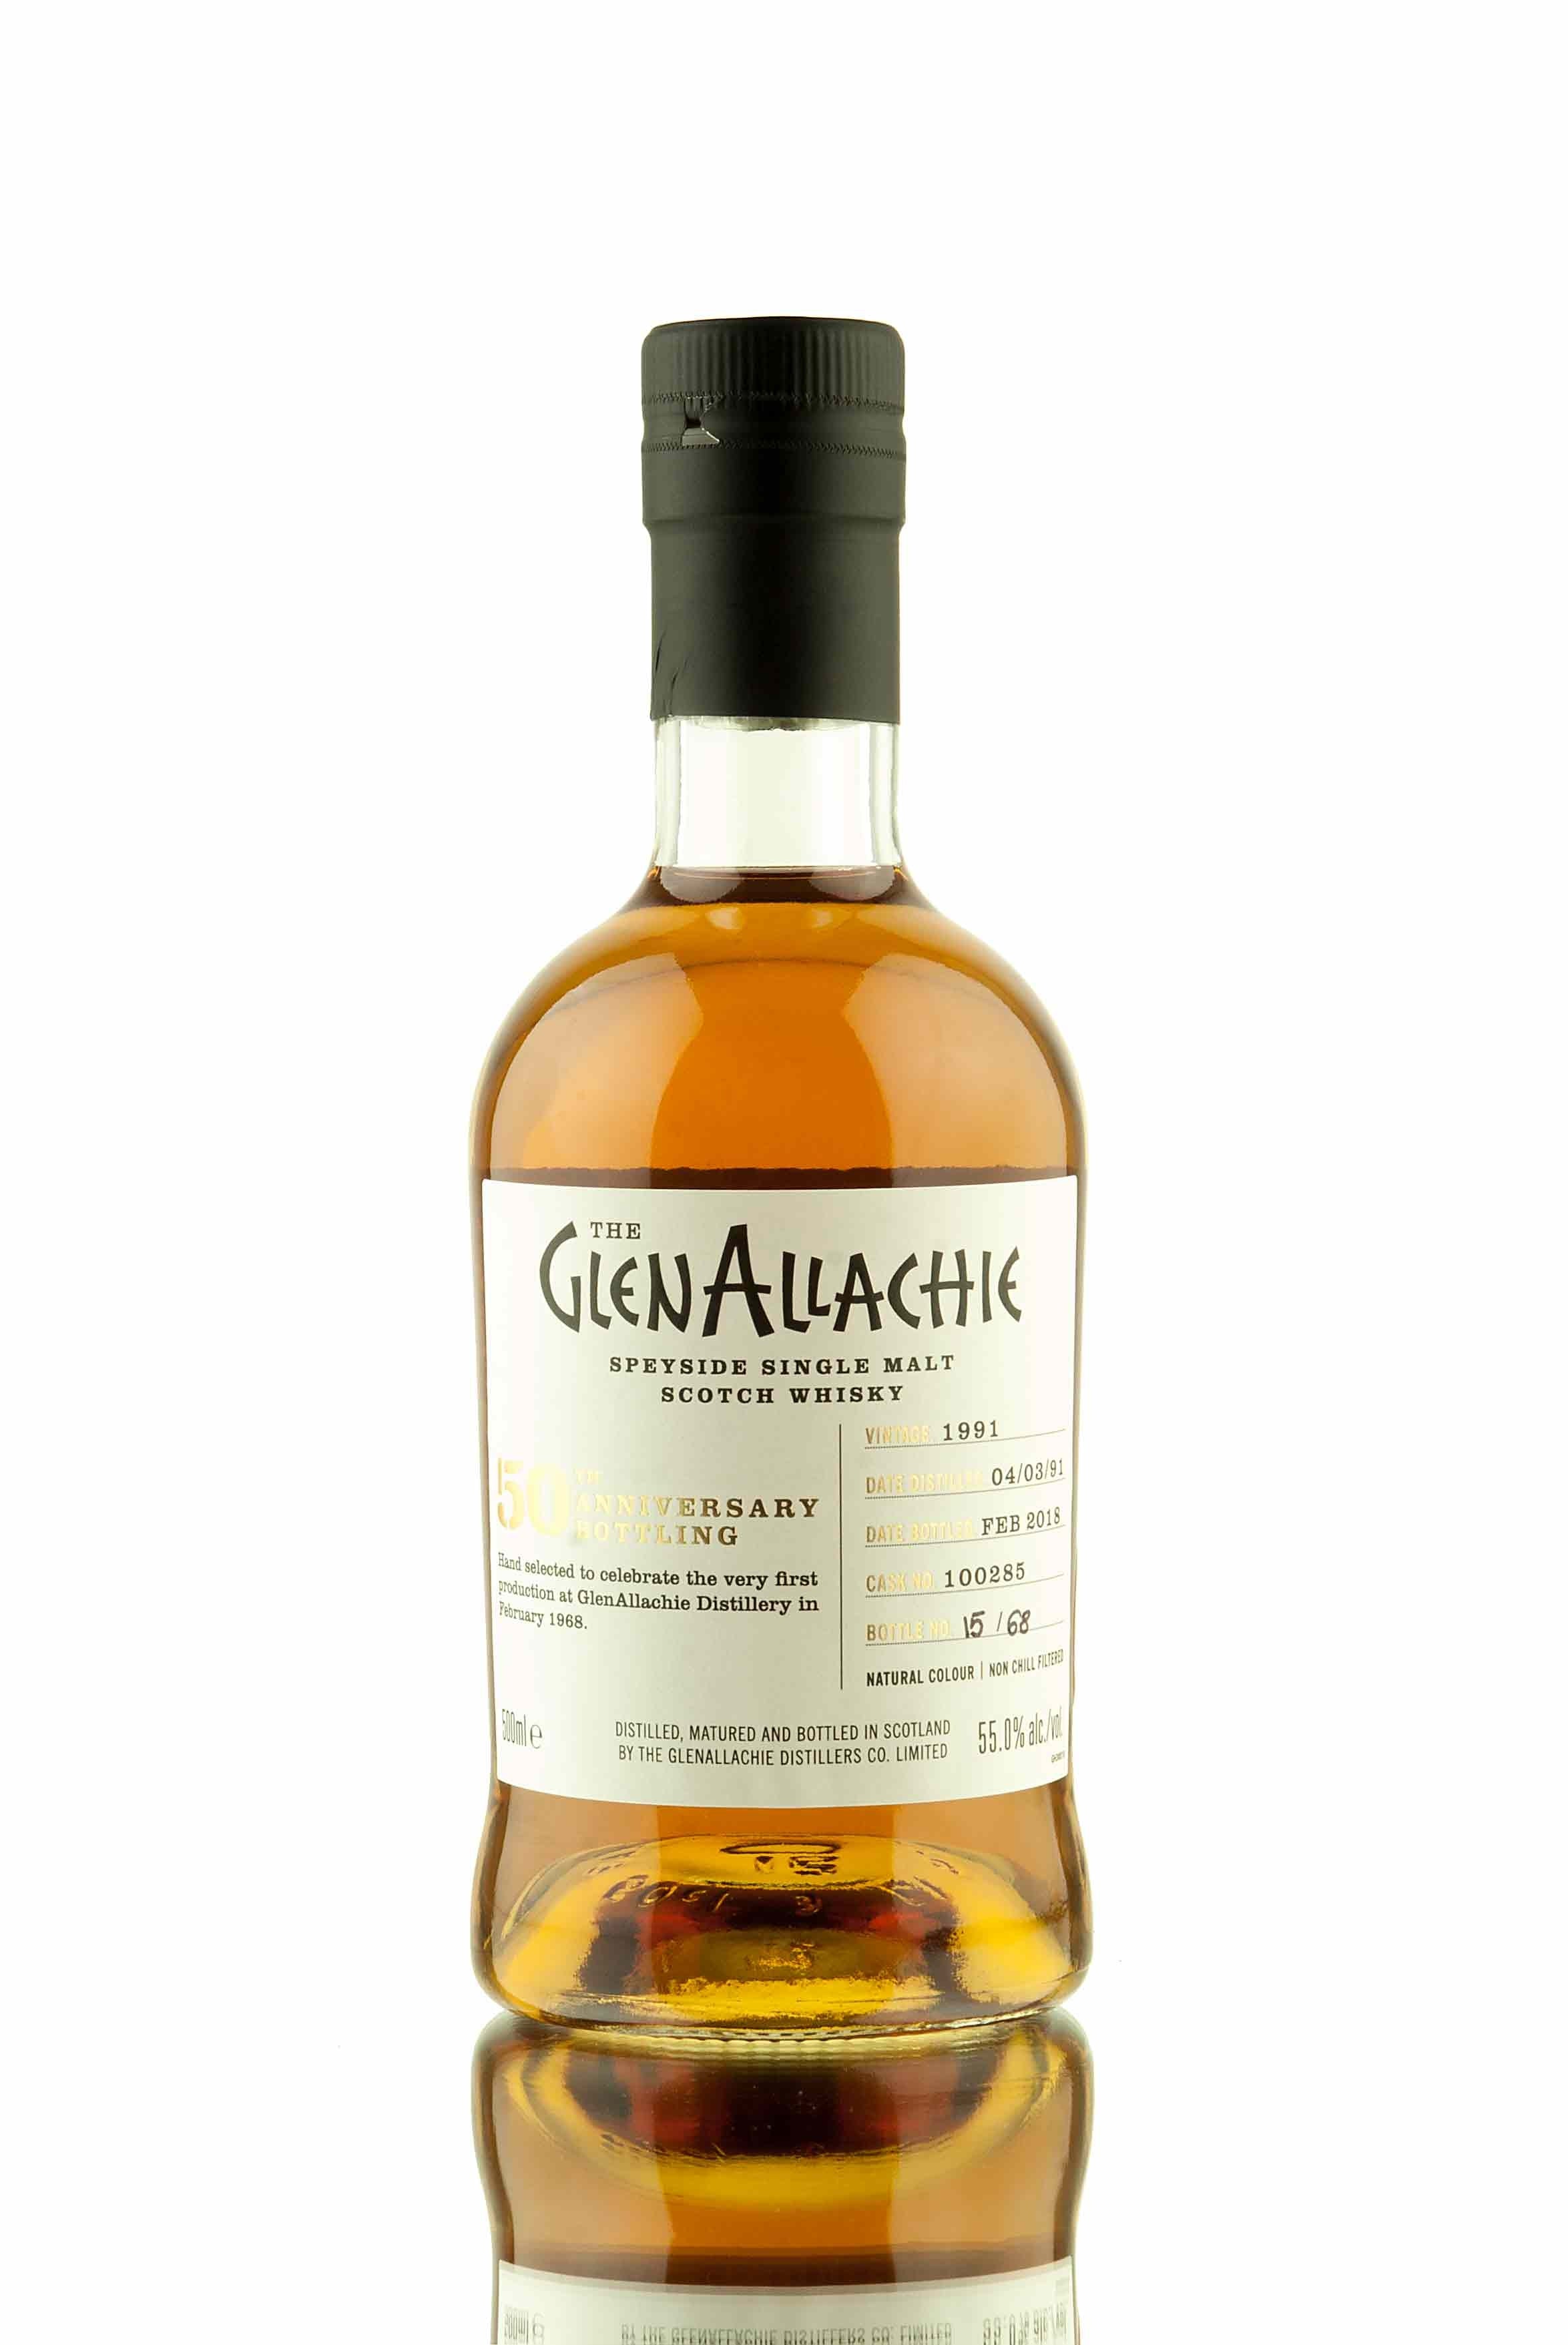 GlenAllachie 26 Year Old - 1991 | Cask 100285